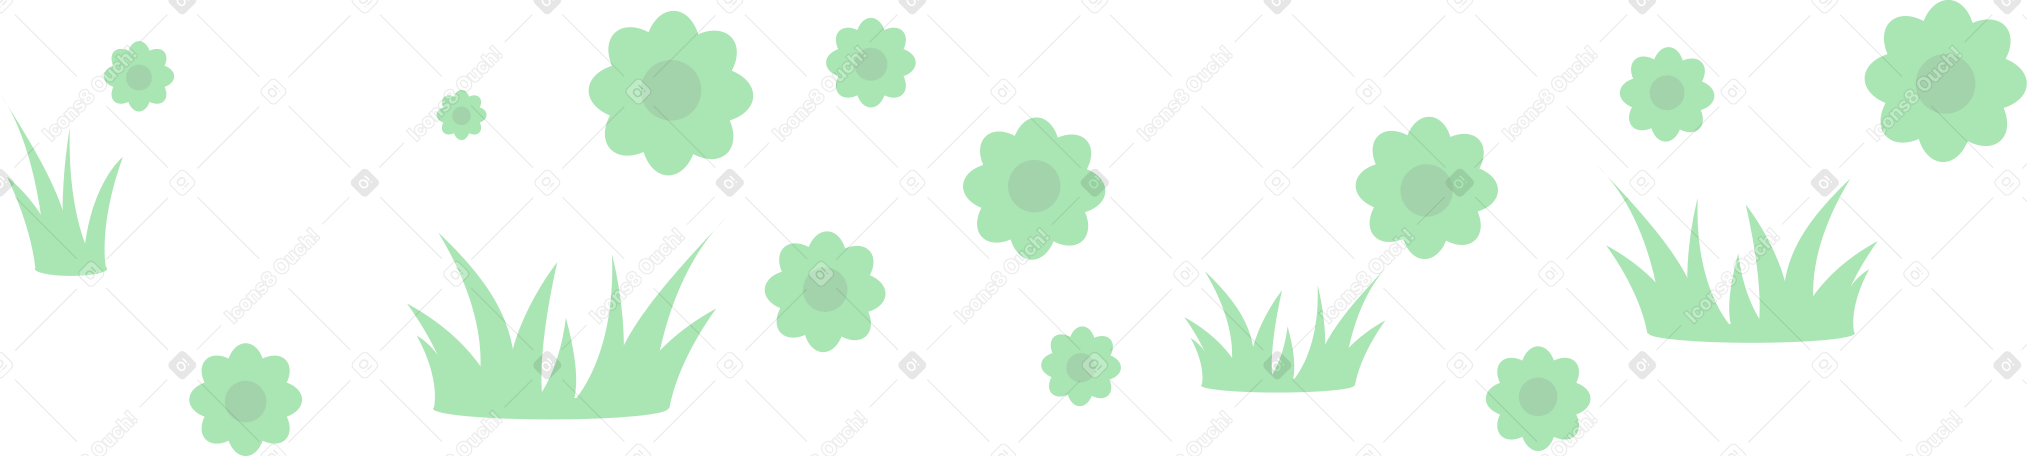 grass and flowers PNG、SVG